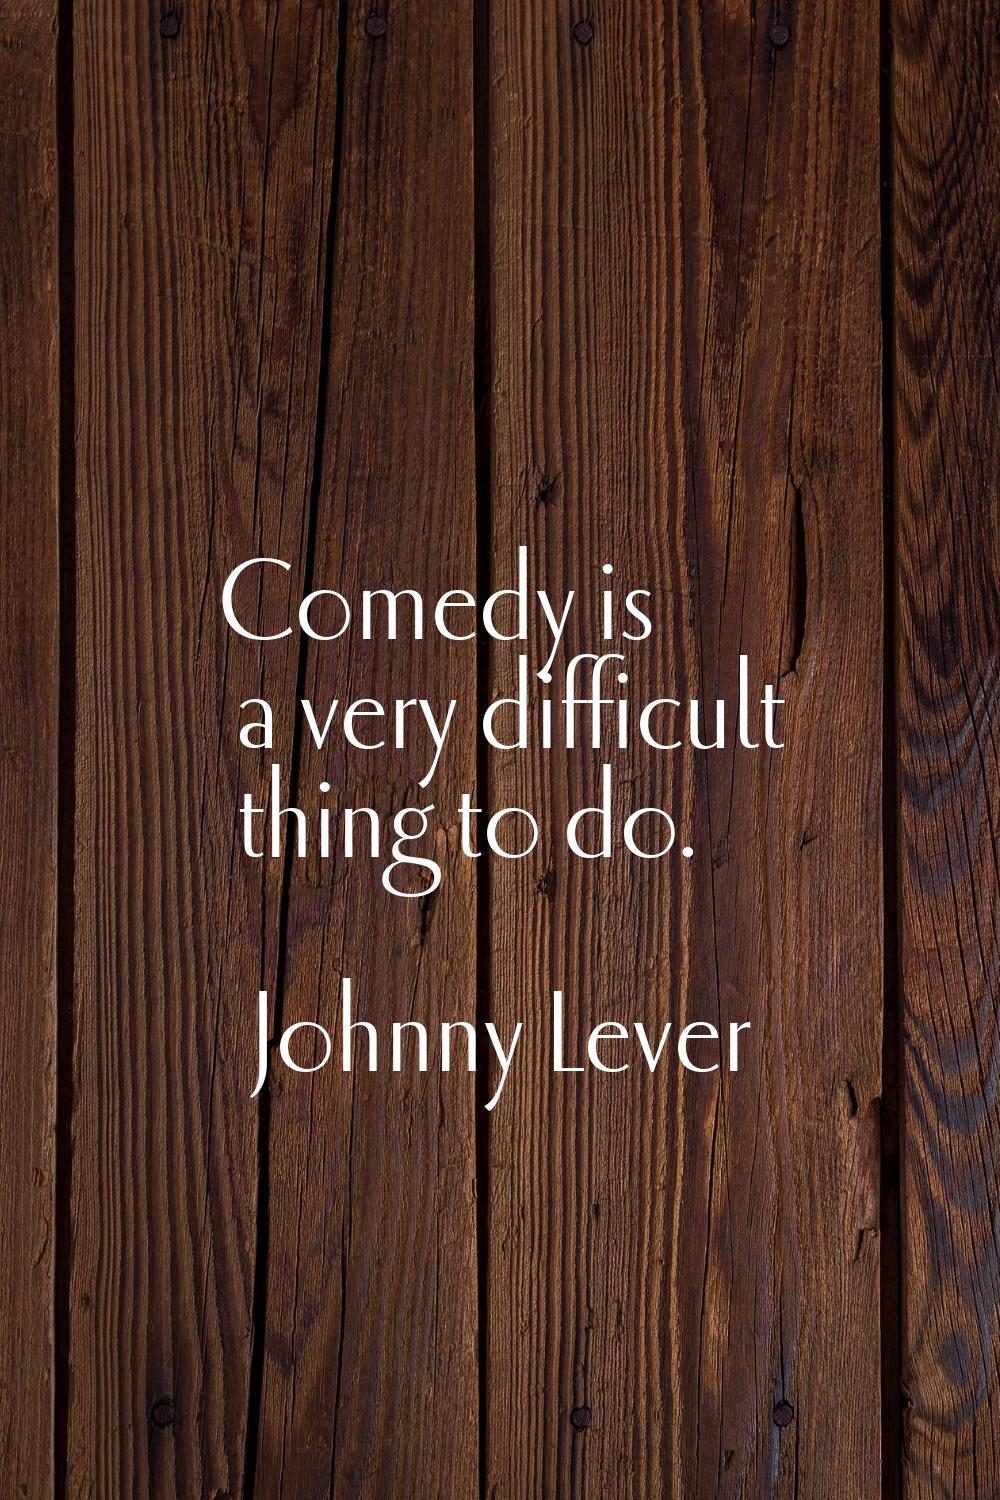 Comedy is a very difficult thing to do.